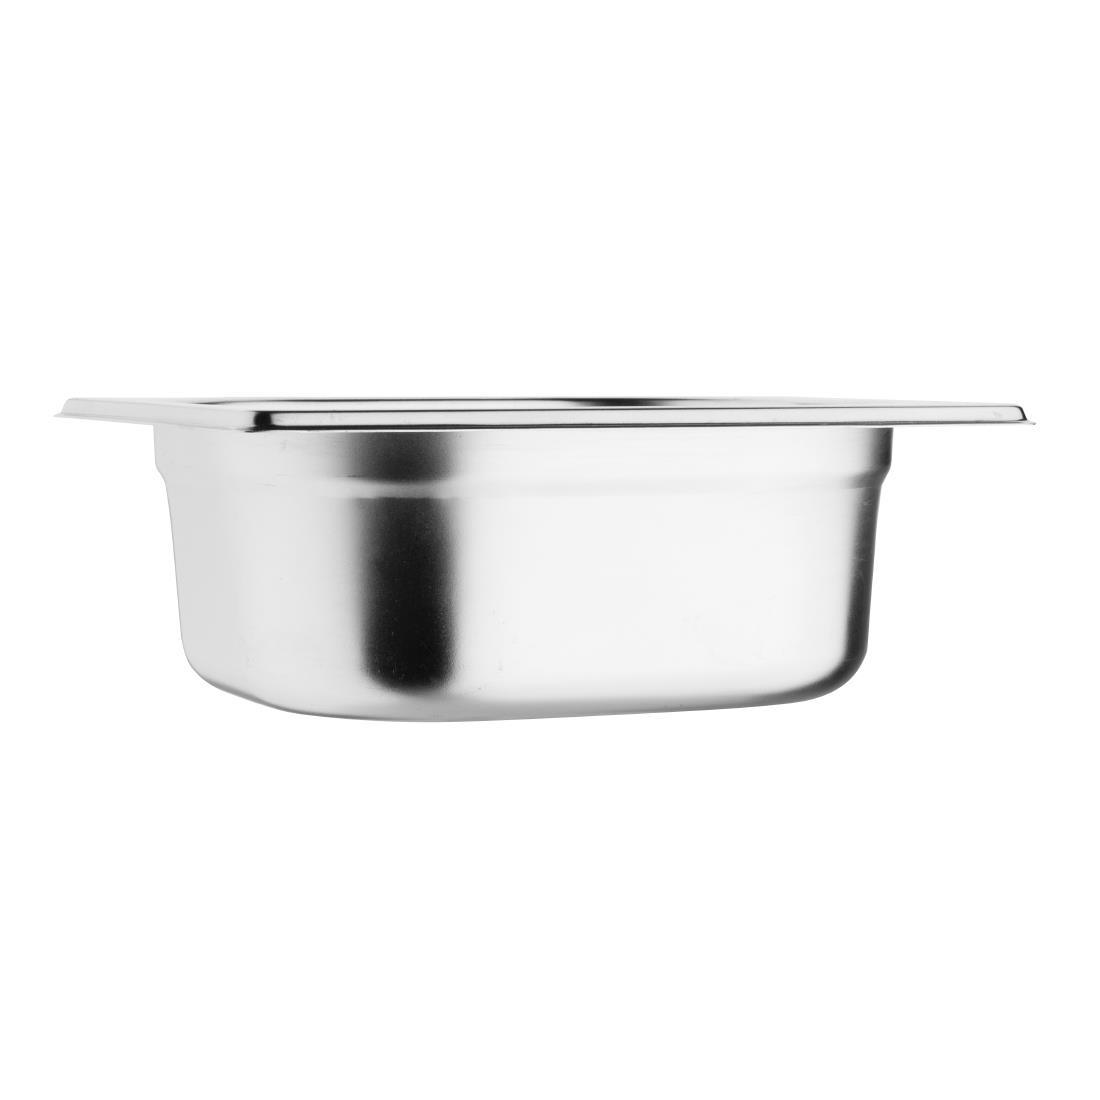 Vogue Stainless Steel 1/6 Gastronorm Pan 65mm - K985  - 2